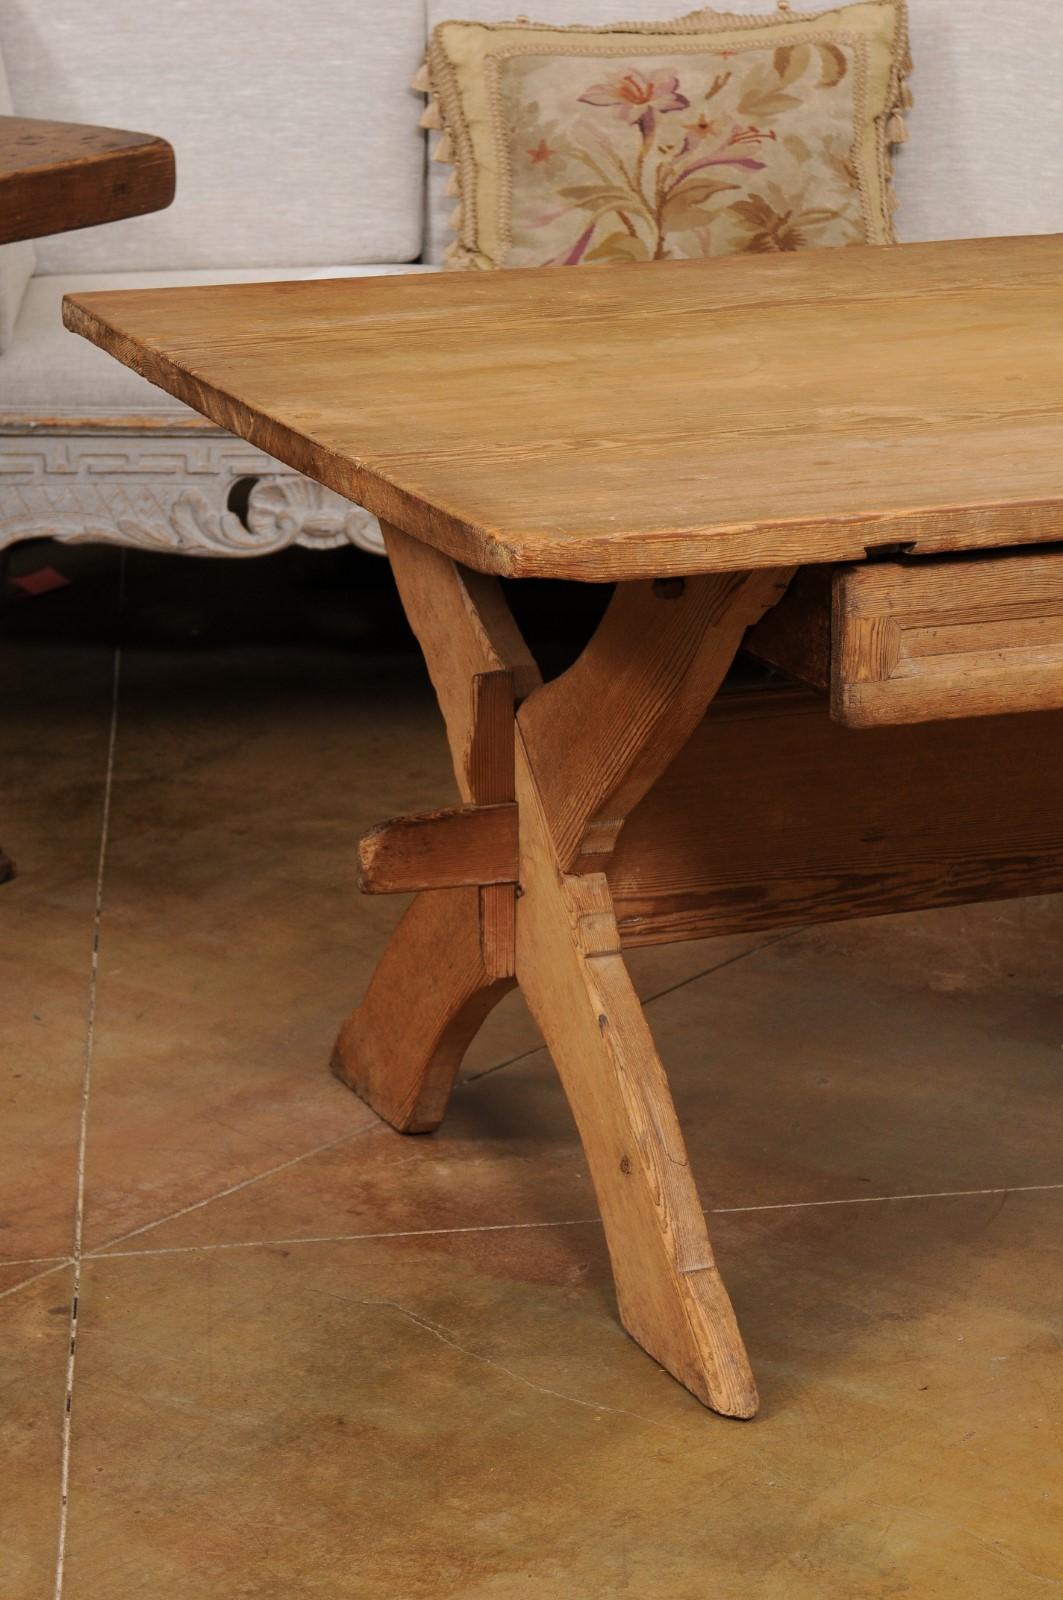 Rustic Swedish 1790s European Pine Sawbuck Table with Drawer and Double X-Form Legs For Sale